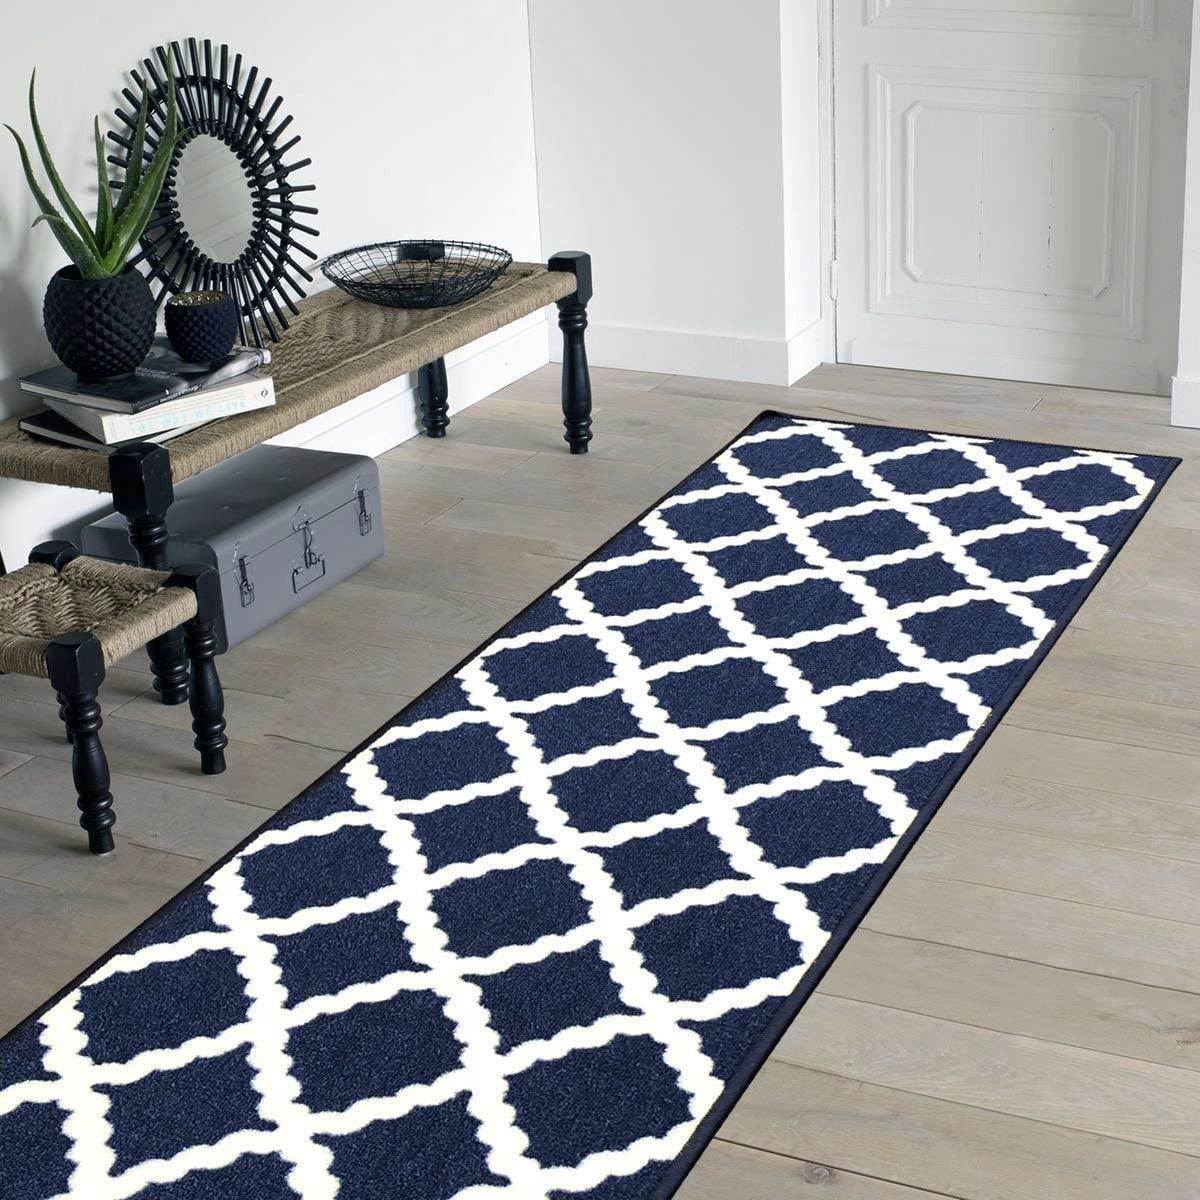 HOMETOWN Sage  2'3X7'7" Runner Rug with FREE Shipping 